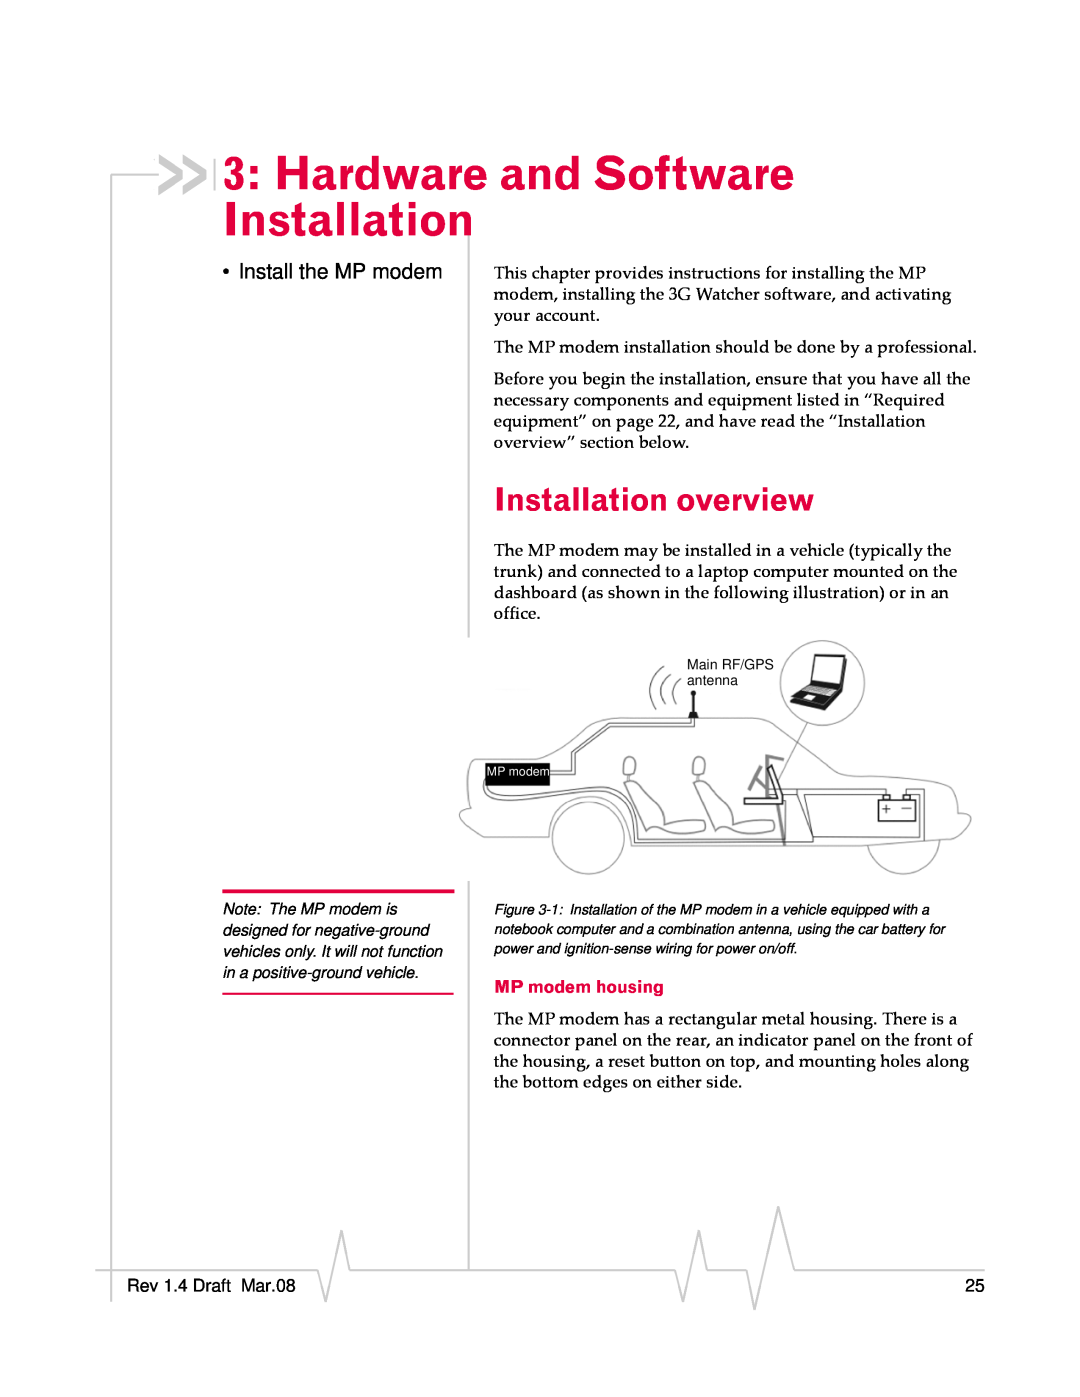 Sierra Wireless MP595W manual Hardware and Software Installation, Installation overview, MP modem housing 